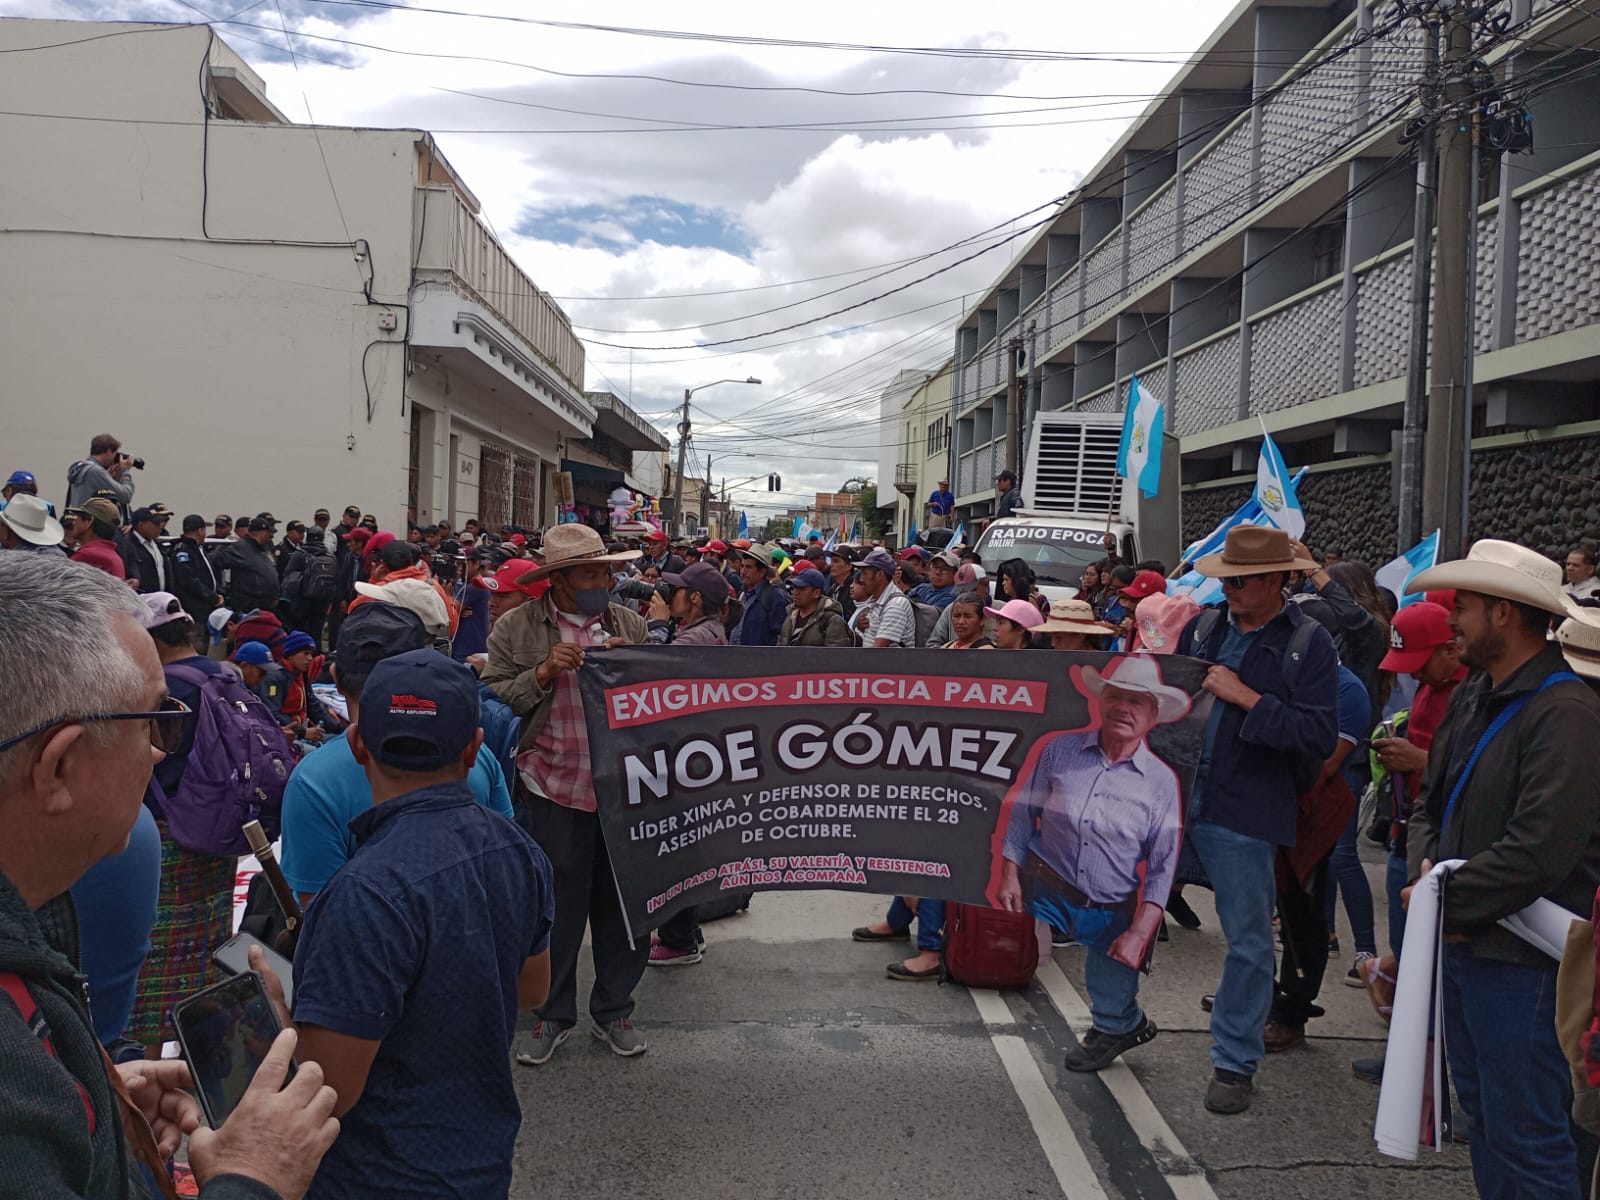 Statement from 119 Organizations: Take Action to Demand Justice for Assassination of Xinka Leader Noé Gómez Barrera